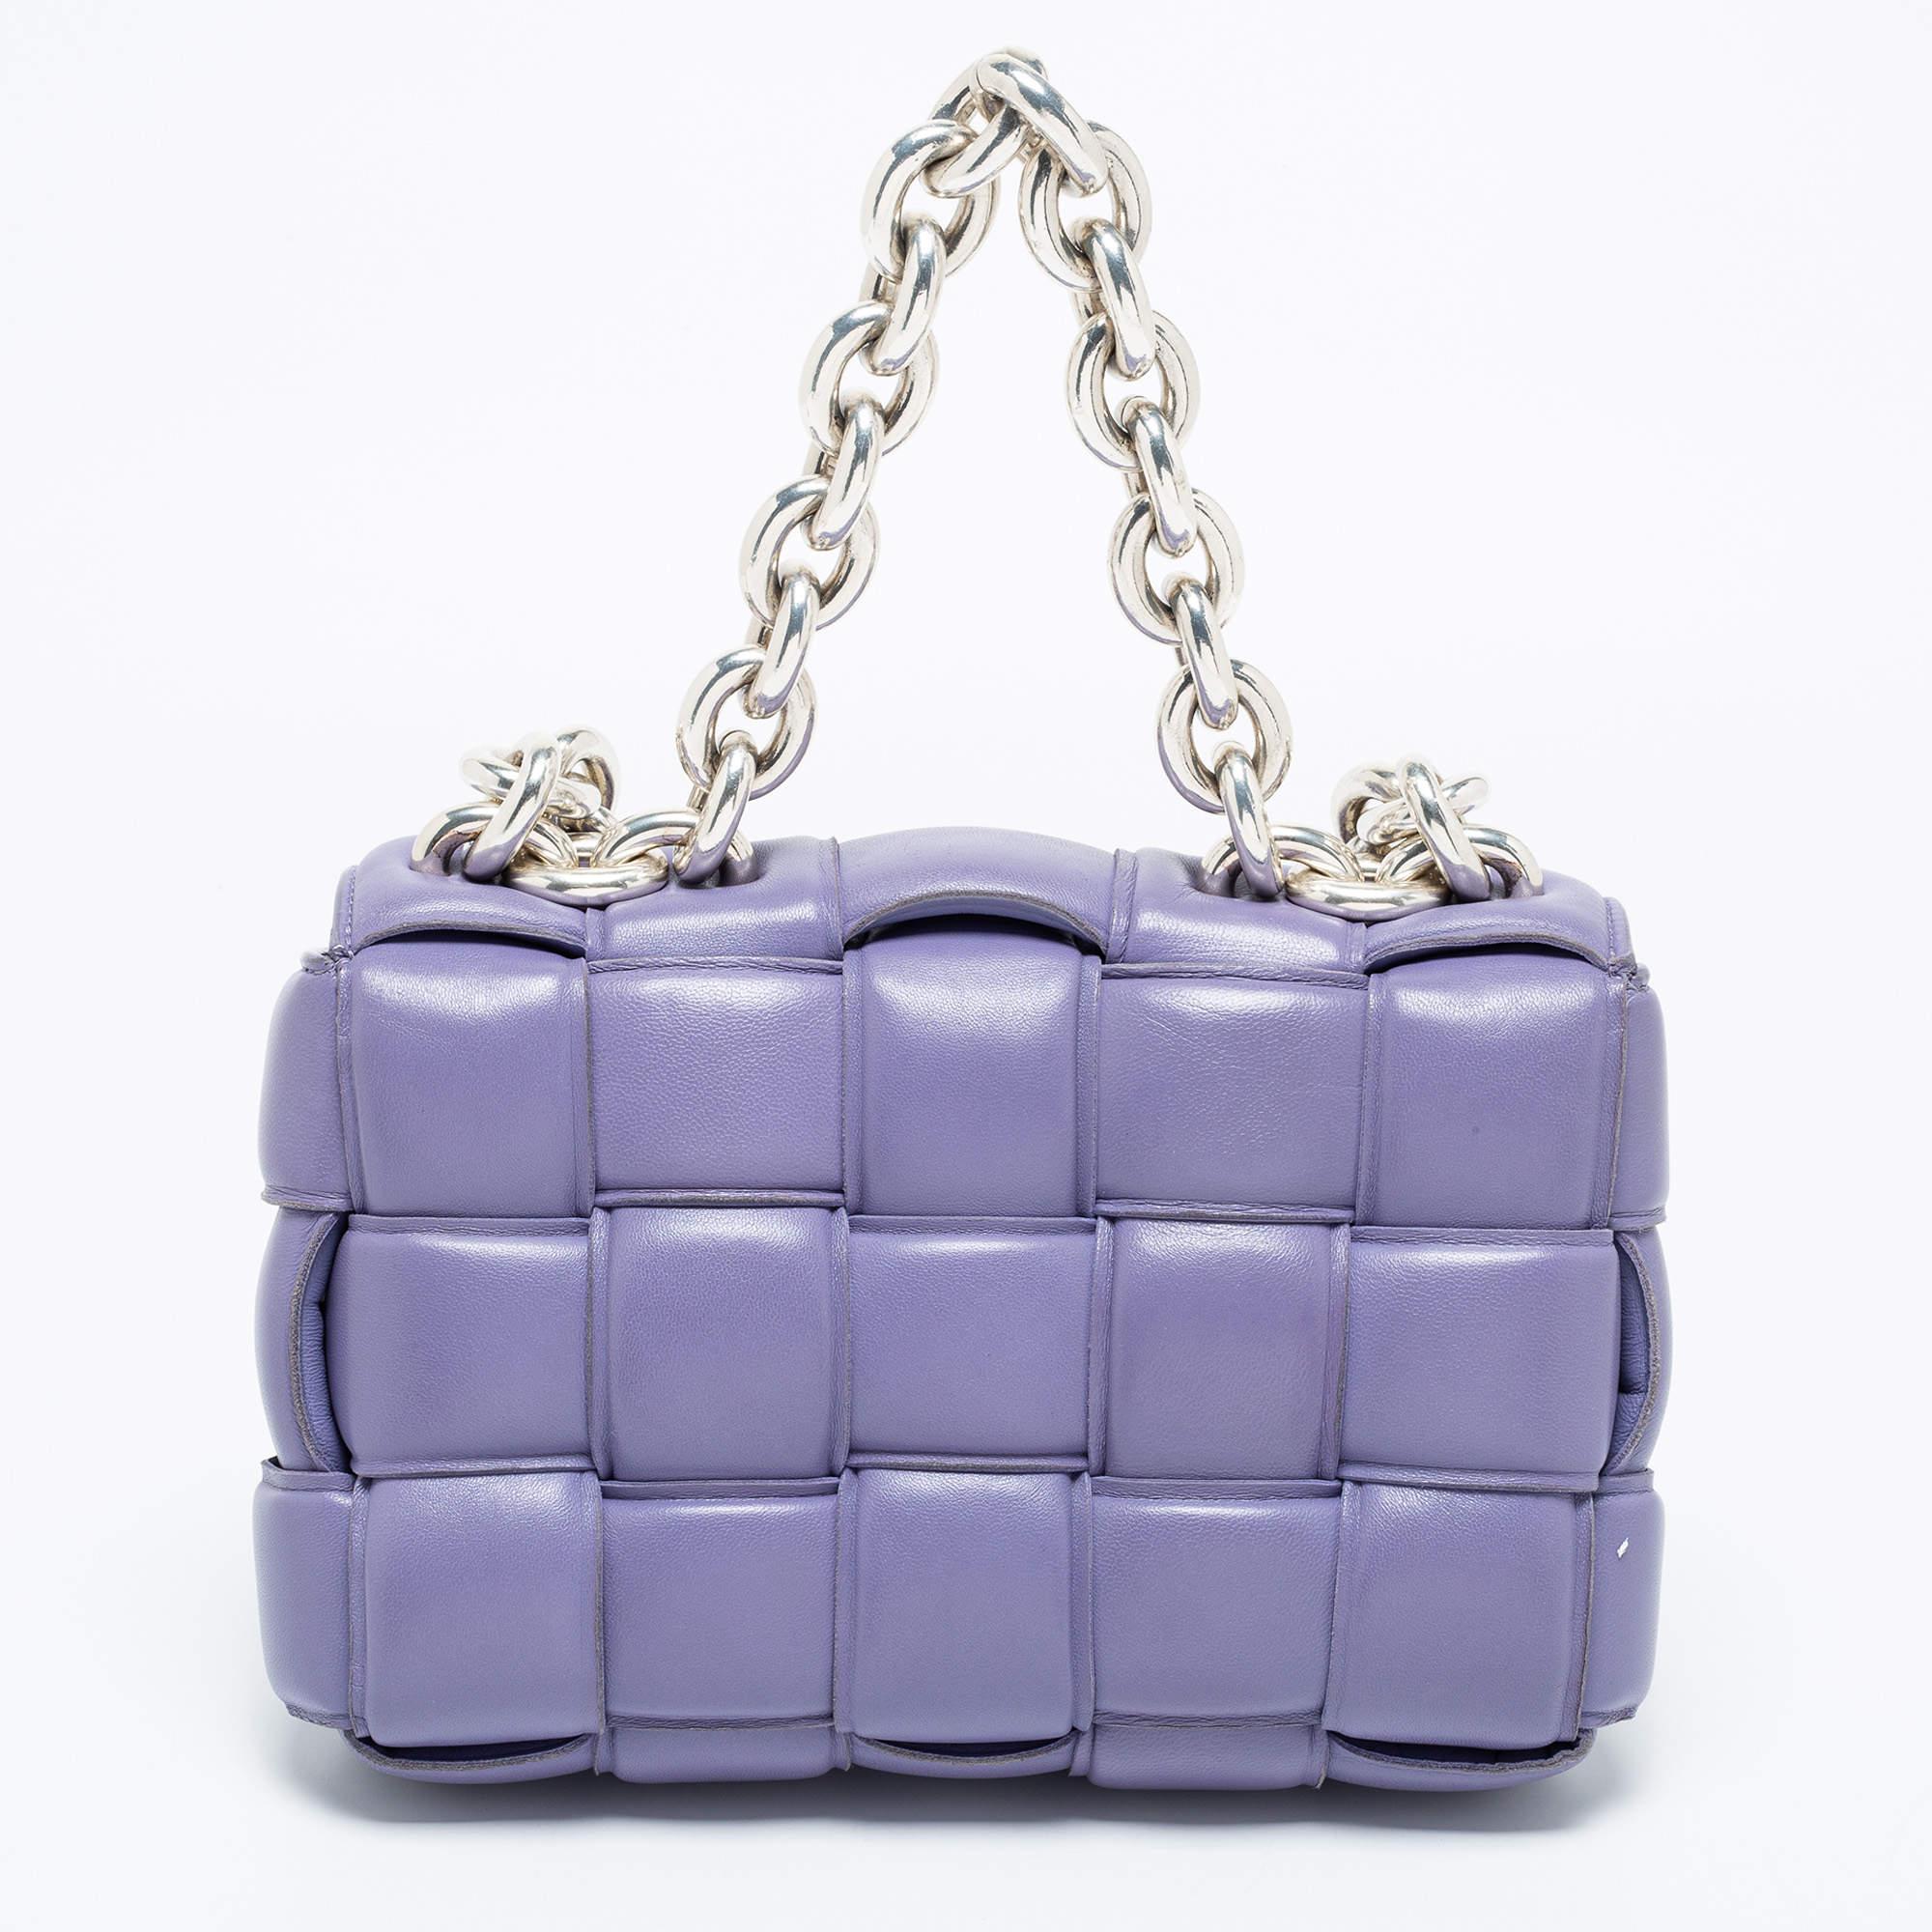 The lovely bag on many fashionistas' minds is the iconic Cassette bag from the house of Bottega Veneta. We have here one in lilac leather, flaunting a padded weave and chunky, metallic chain handles. The insides are well-sized to fit your phone,